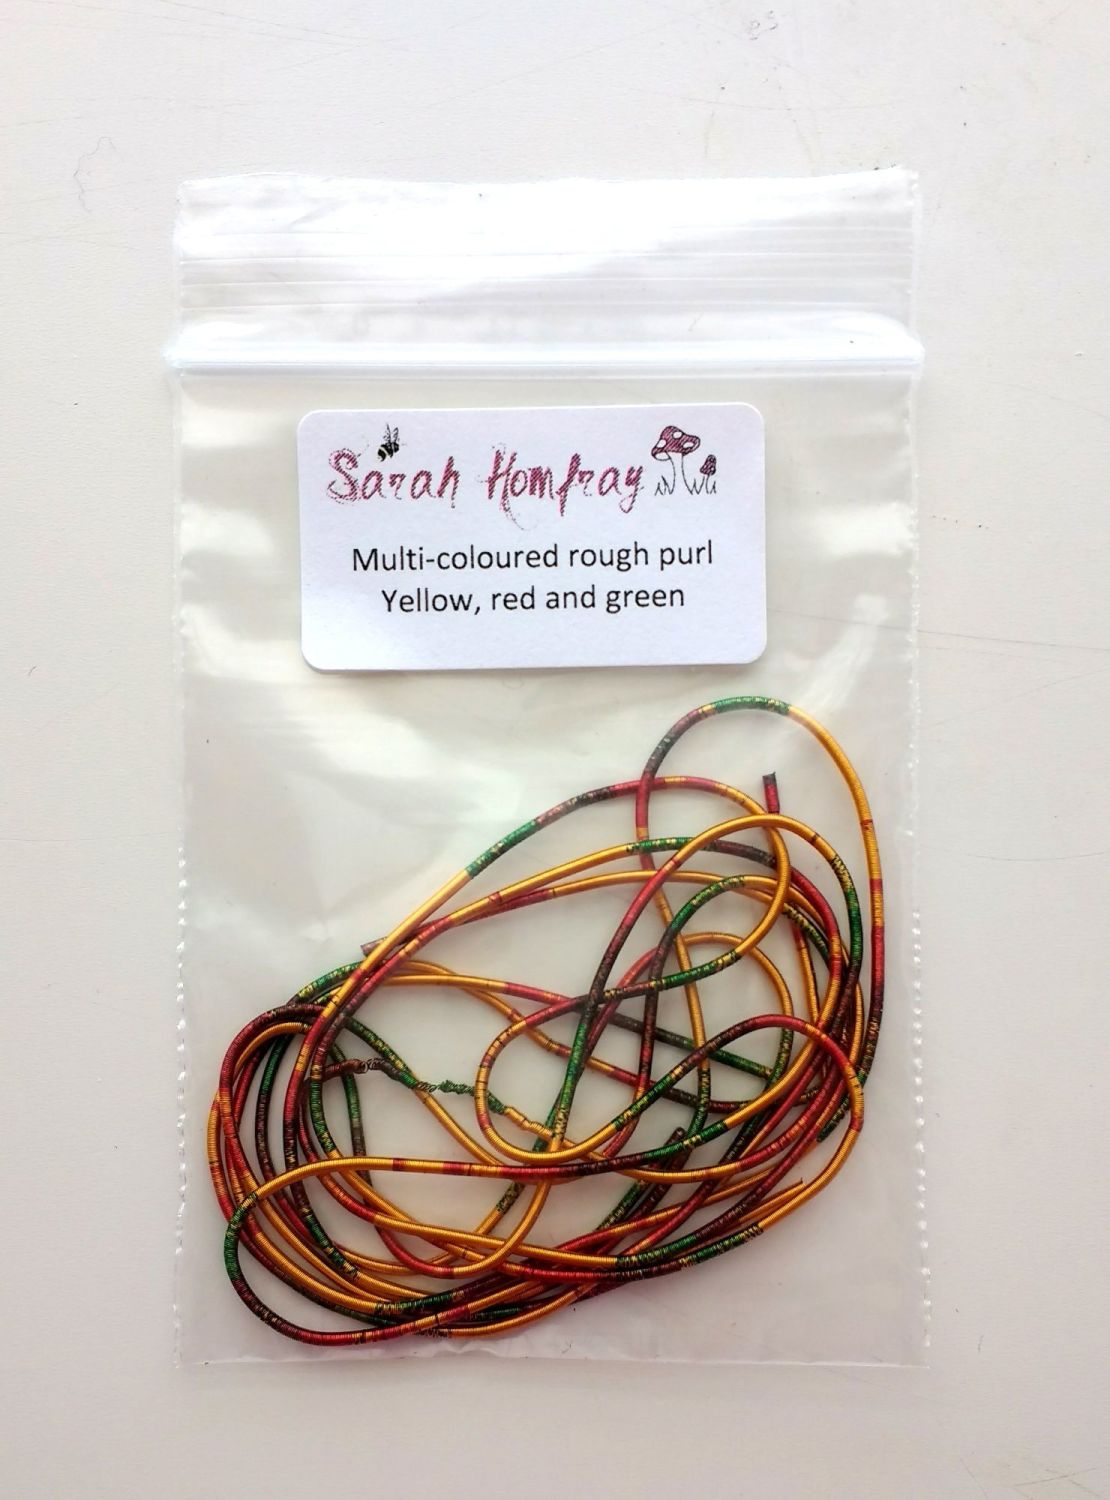 NEW! Multi-coloured rough purl no.6 - Yellow, red and green